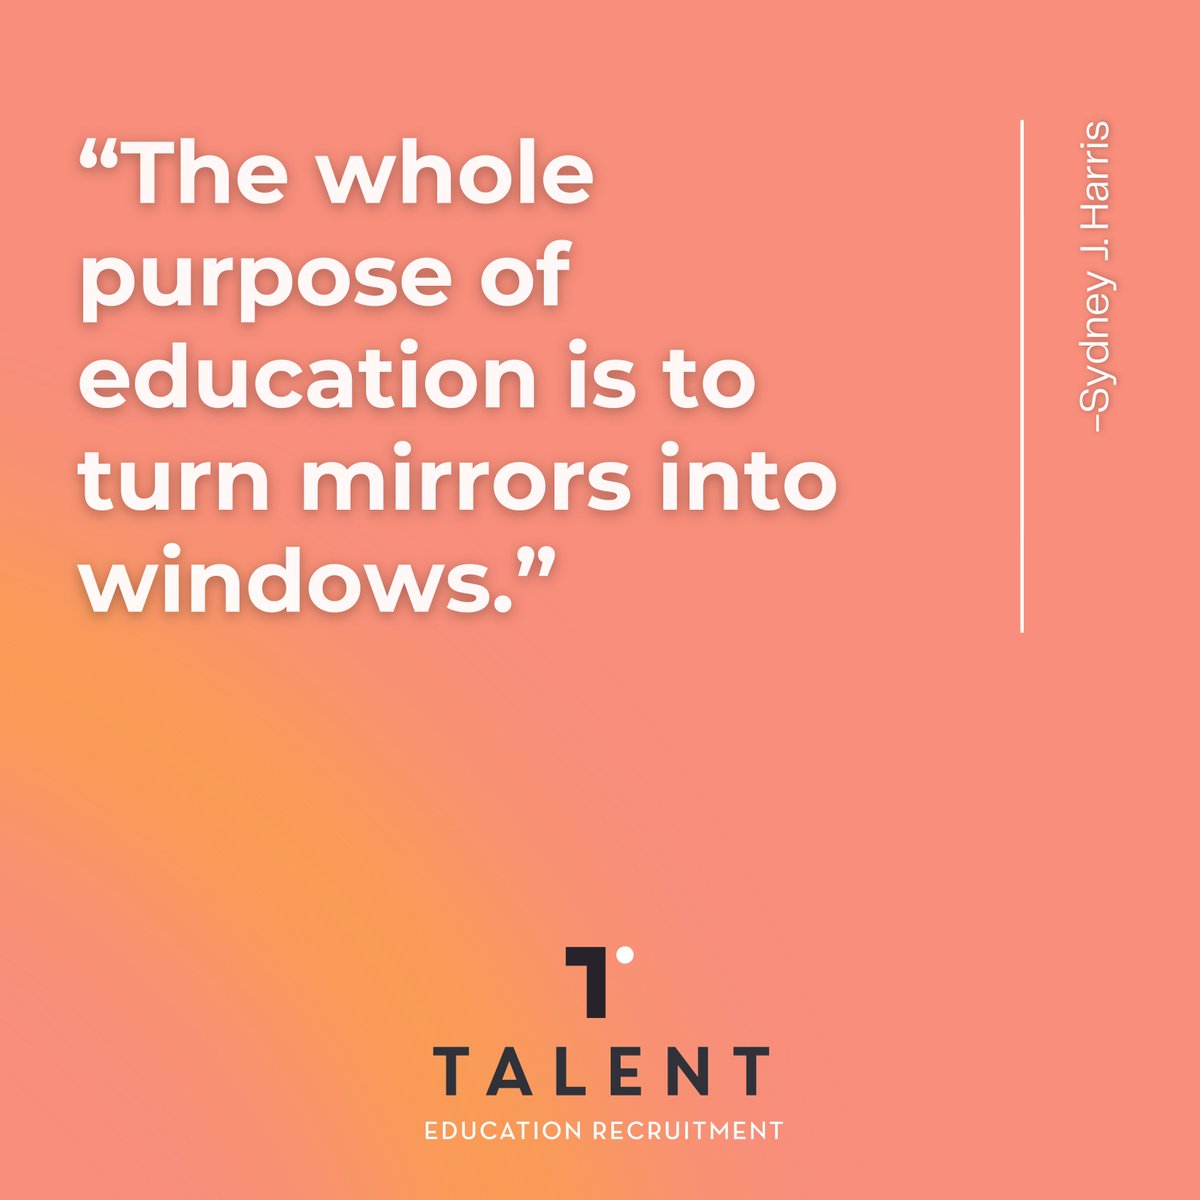 It's a new week with new opportunities to inspire and be inspired! 

Let's make this Monday a day of motivation, a day to take your steps into a career in education - visit talen-education.co.uk for more info...

#GetIntoTeaching #OldhamHour #EducationRecruitment #TeachingJobs